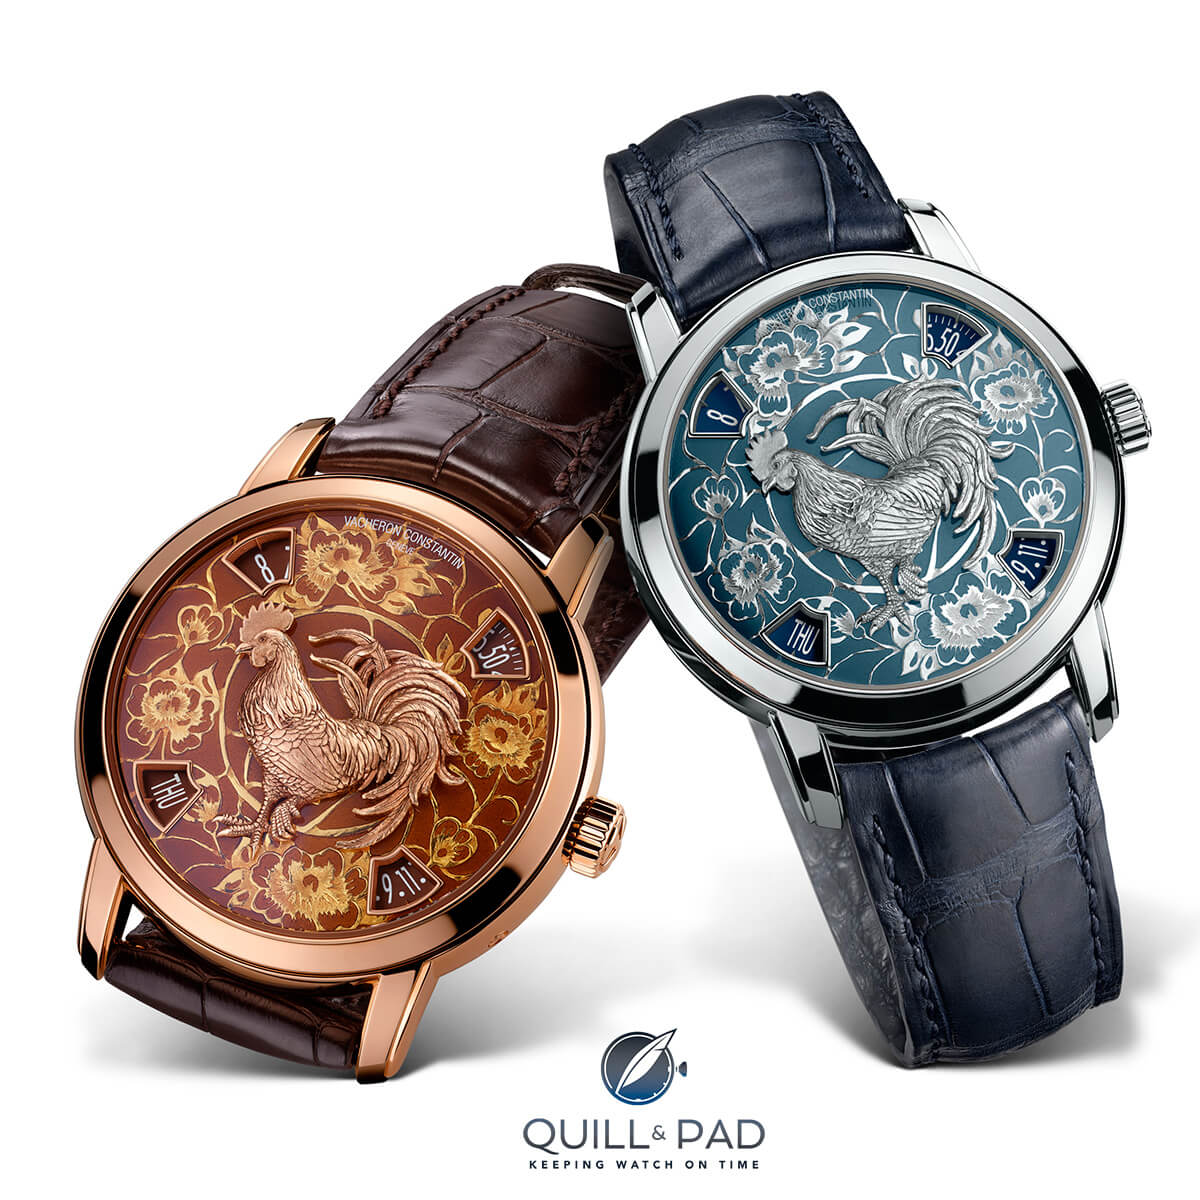 Vacheron Constantin Métiers d’Art Legend of the Chinese Zodiac Year of the Rooster